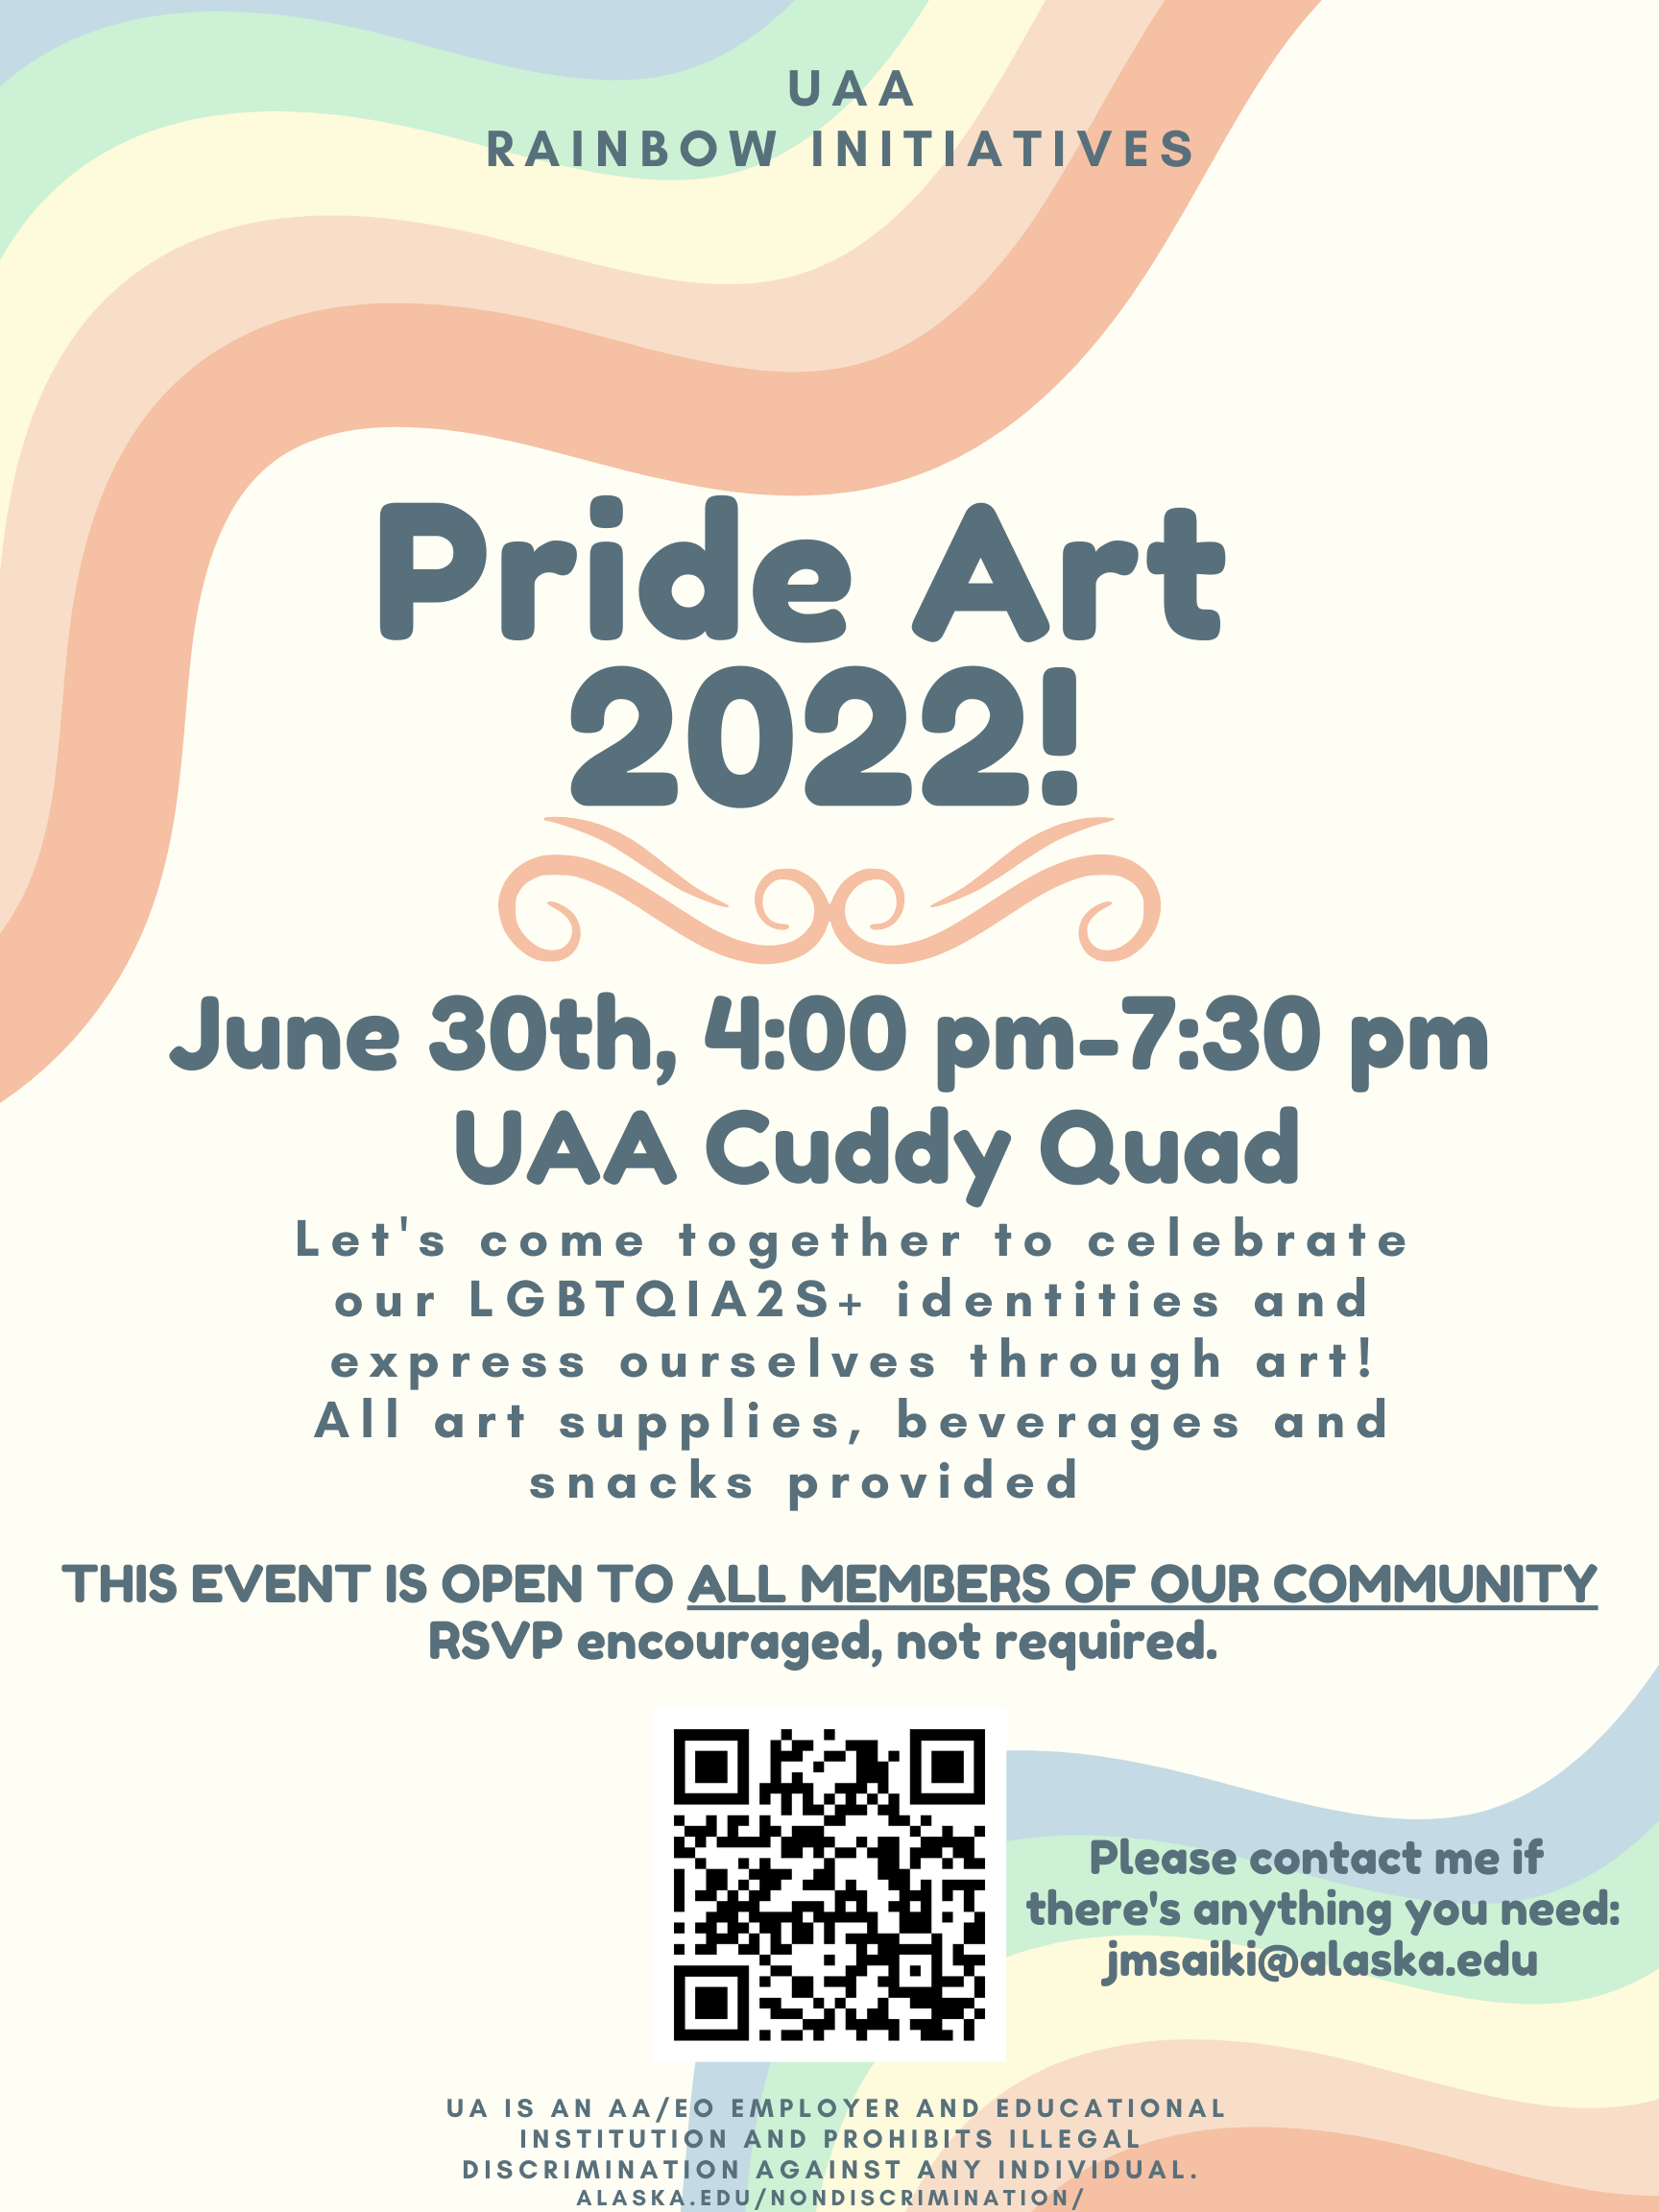 Join UAA Rainbow Initiatives for Pride Art 2022! June 30th, 4 p.m. to 7:30 p.m. in the UAA Cuddy Quad. Open to all members of our community!